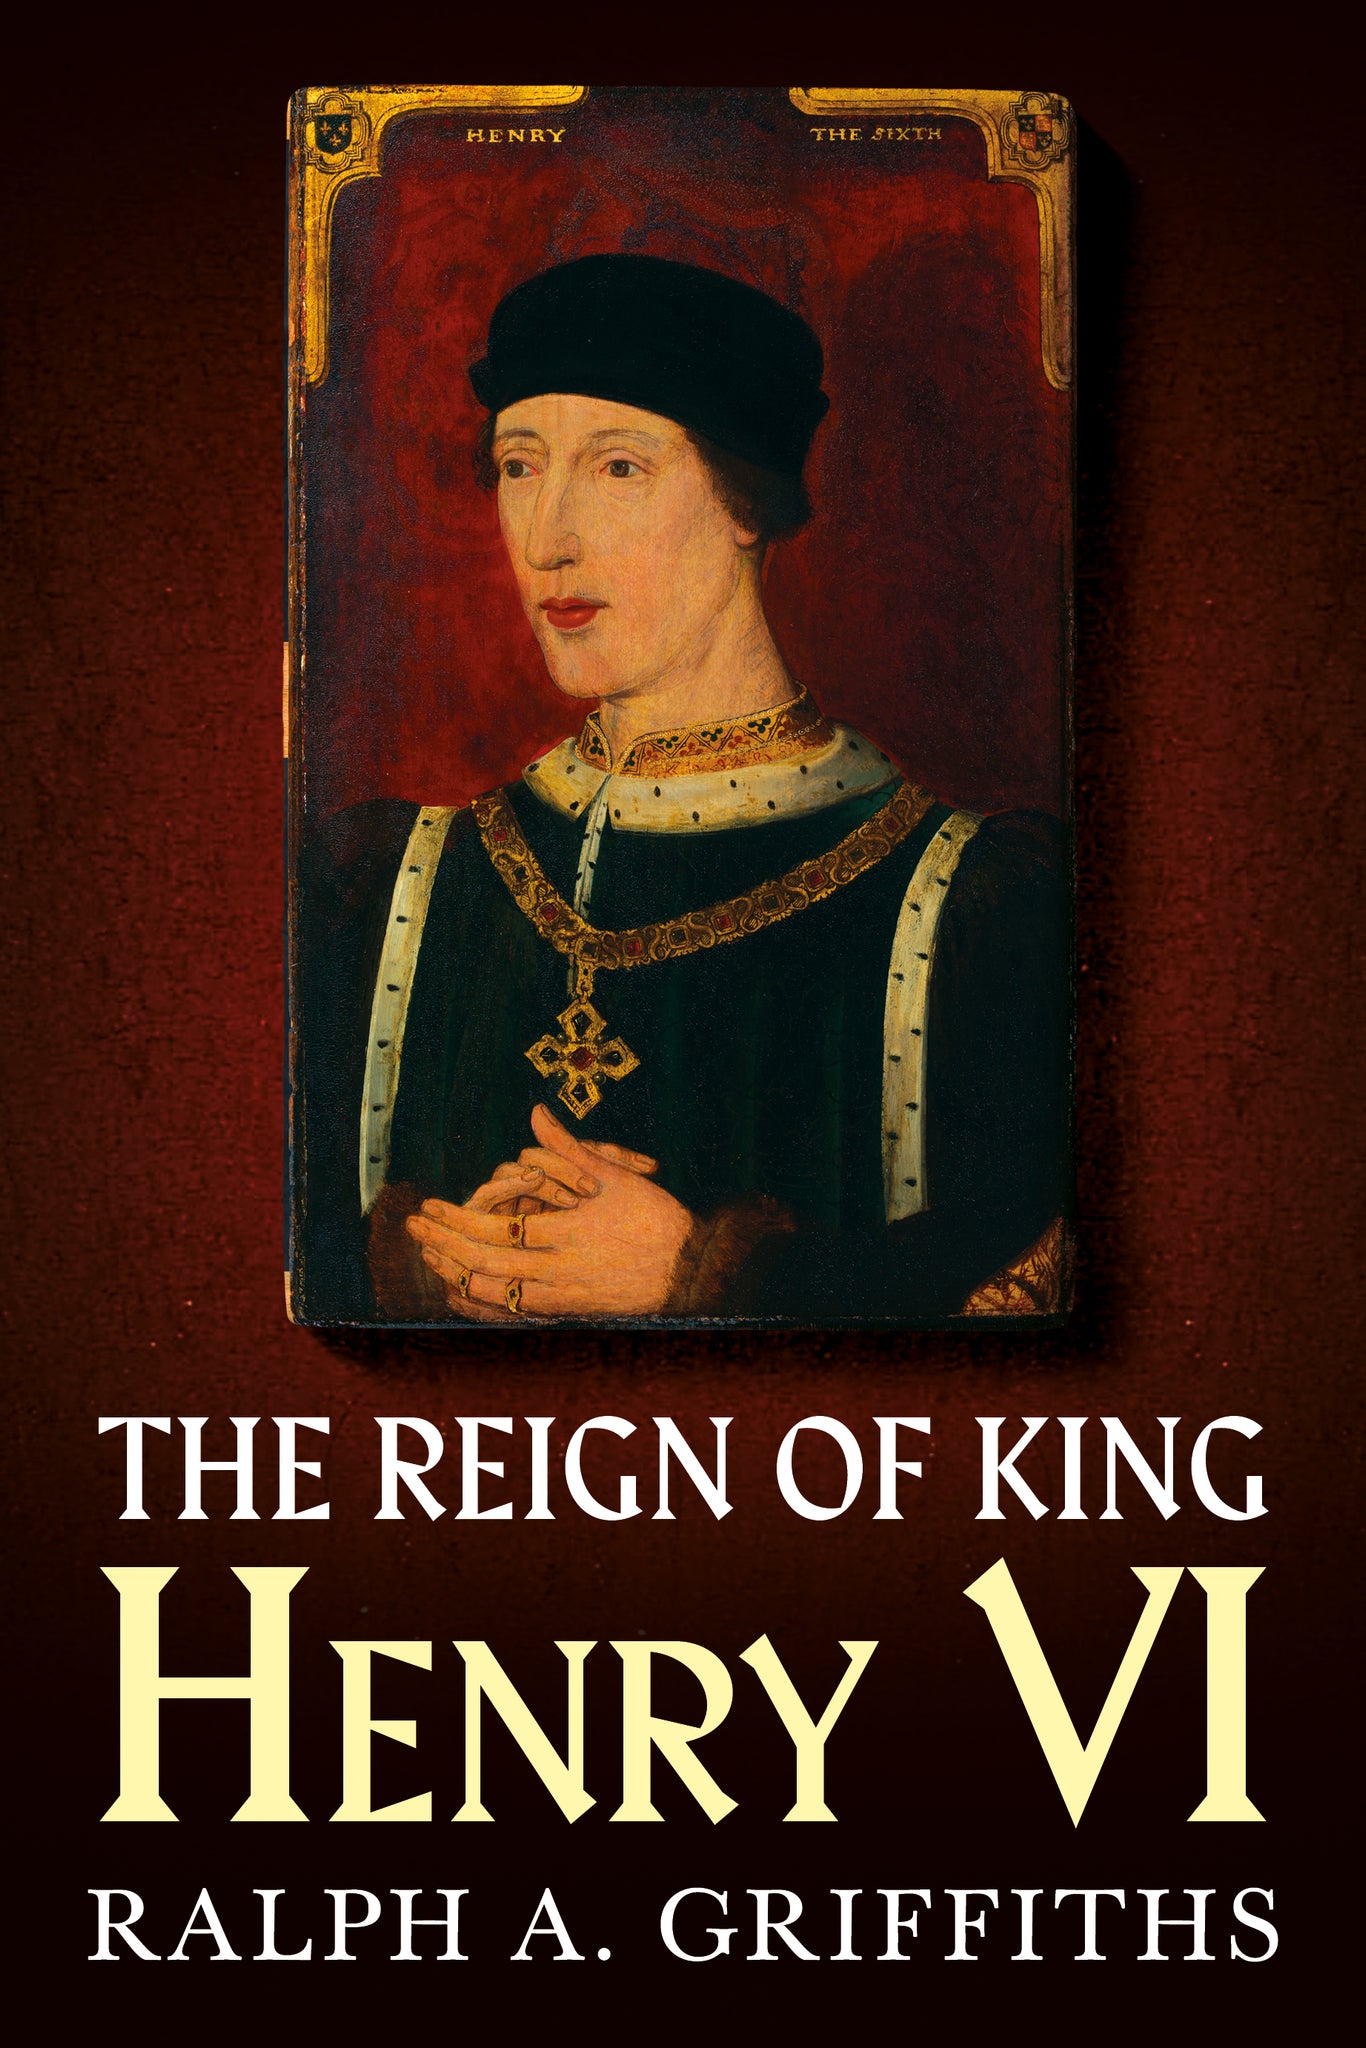 The Reign of King Henry VI - available now from Fonthill Media